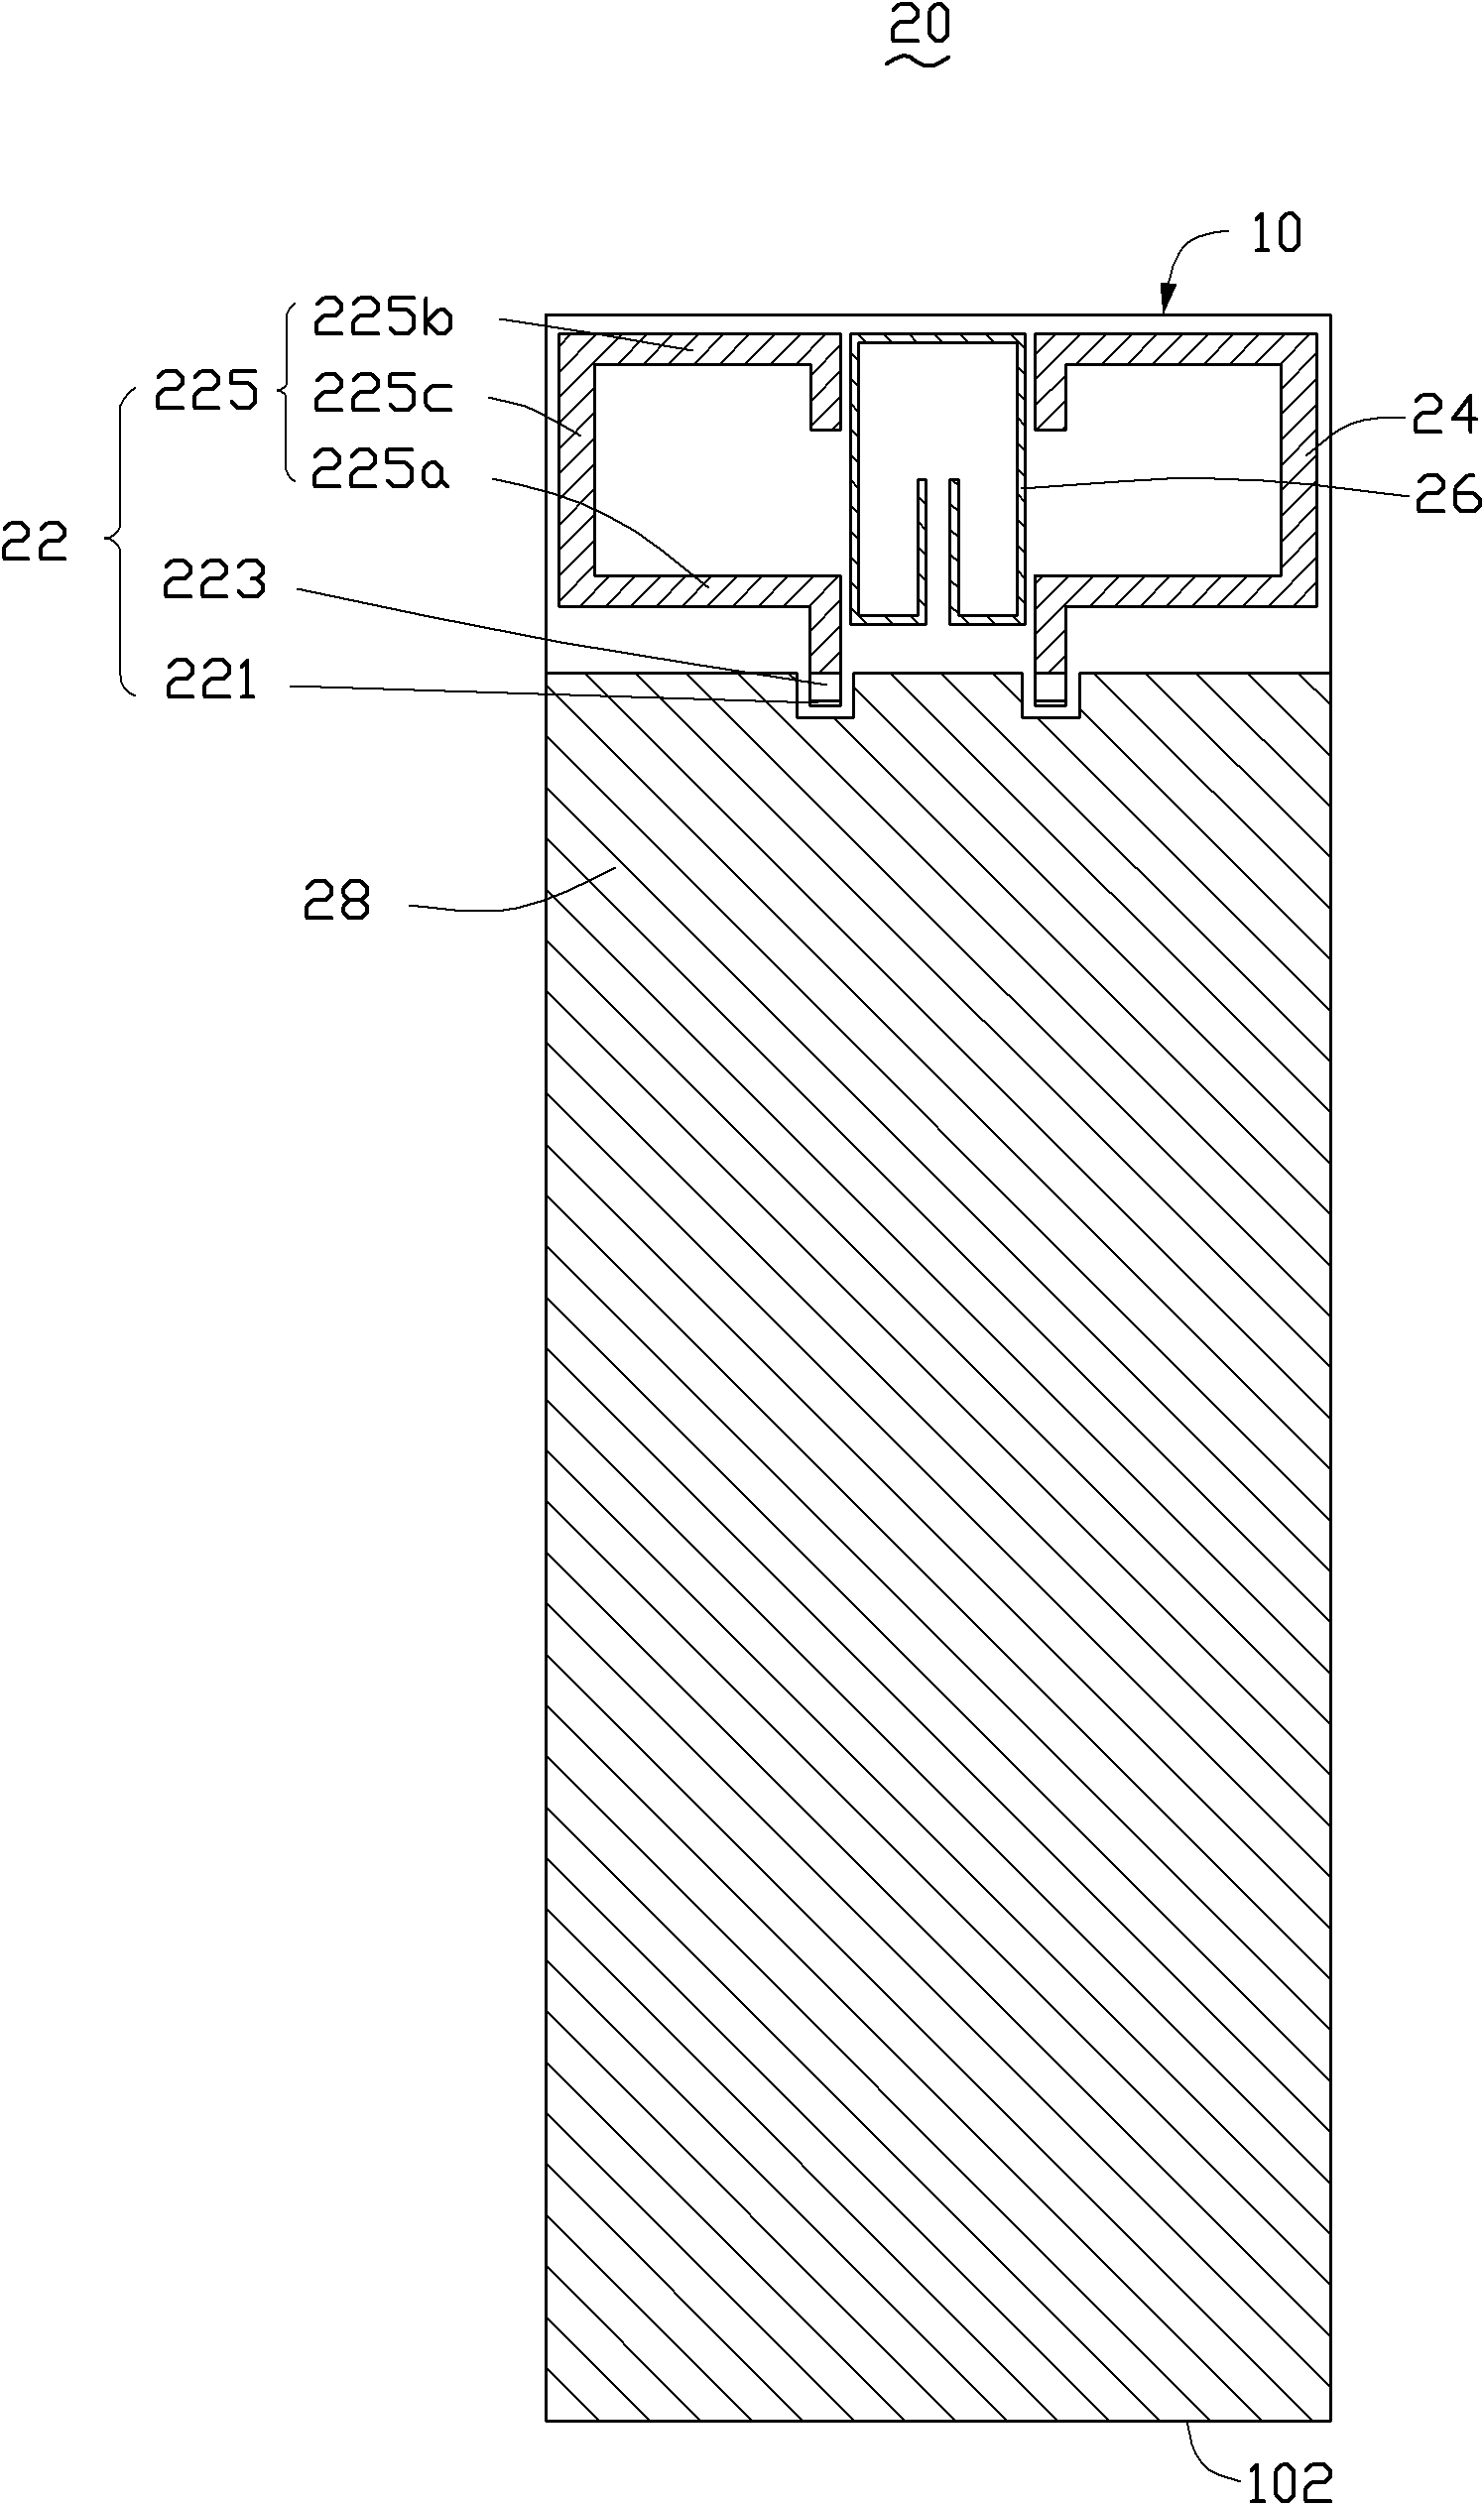 Multiple-input-and-output antenna